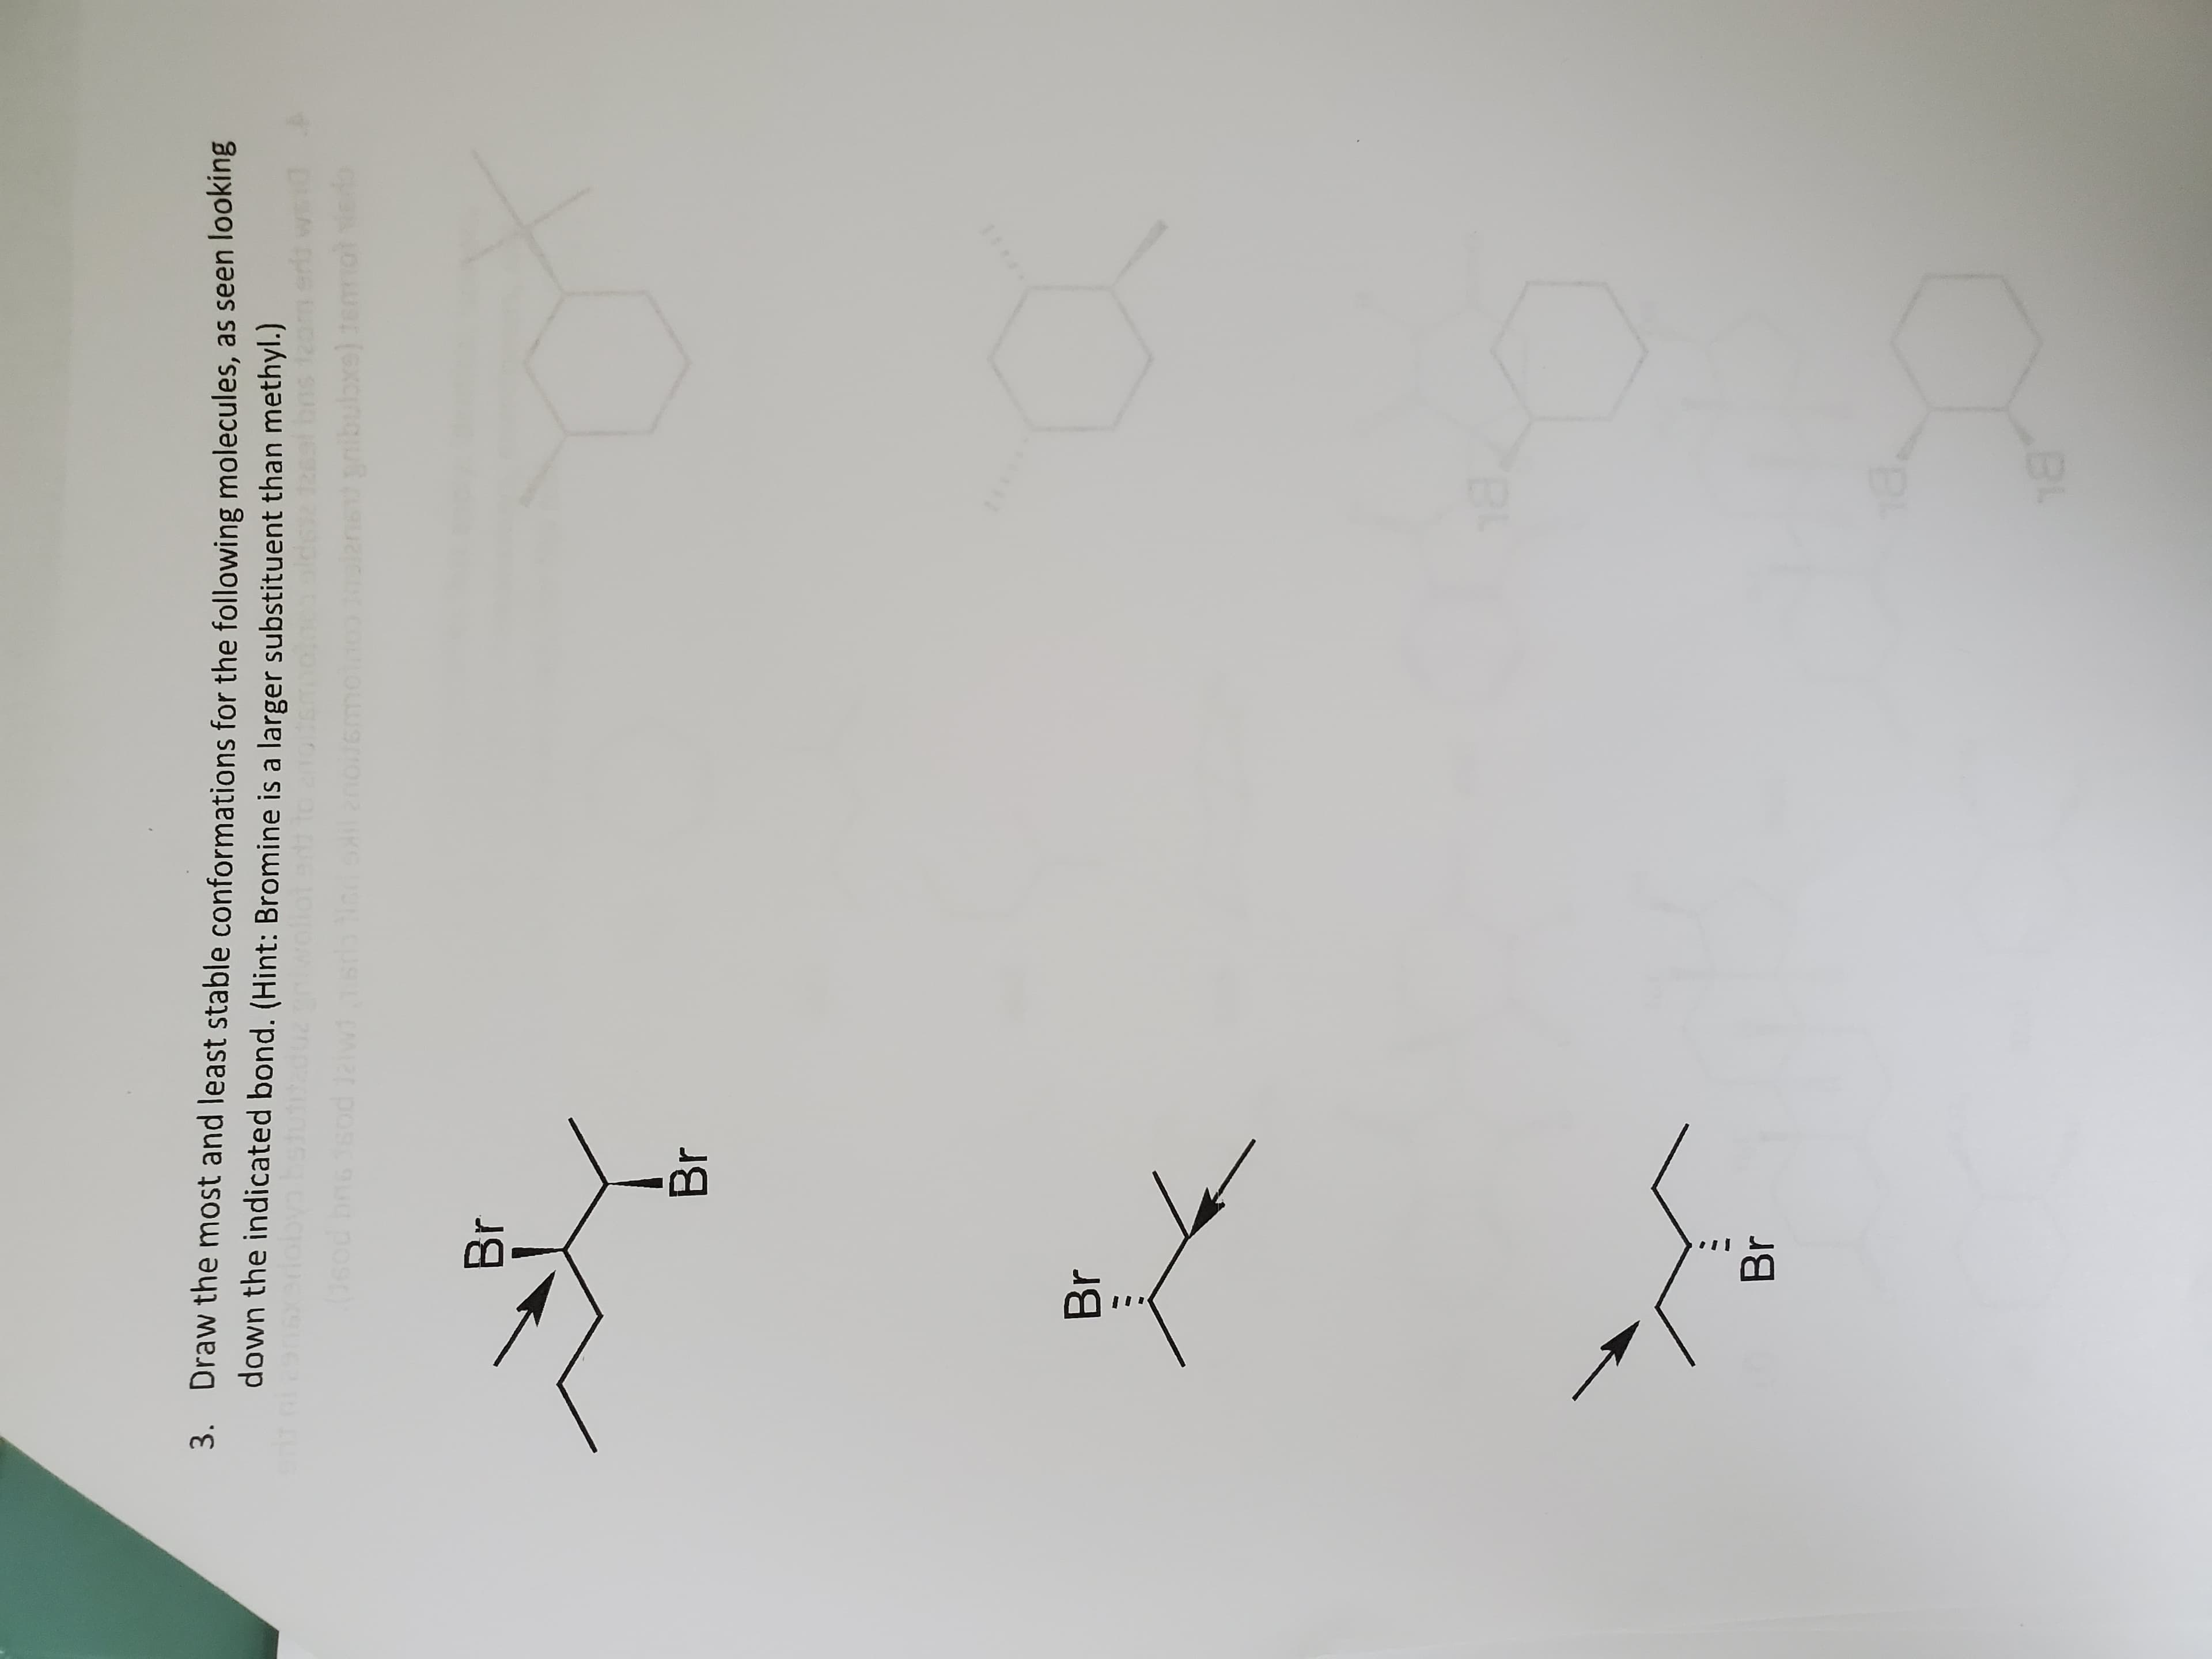 3. Draw the most and least stable conformations for the following molecules, as seen looking
down the indicated bond. (Hint: Bromine is a larger substituent than methyl.)
lot ad to notsmol
obya botutadu
anibubxe) temmol ed
post)
Br
Br
Br
BL
Br
